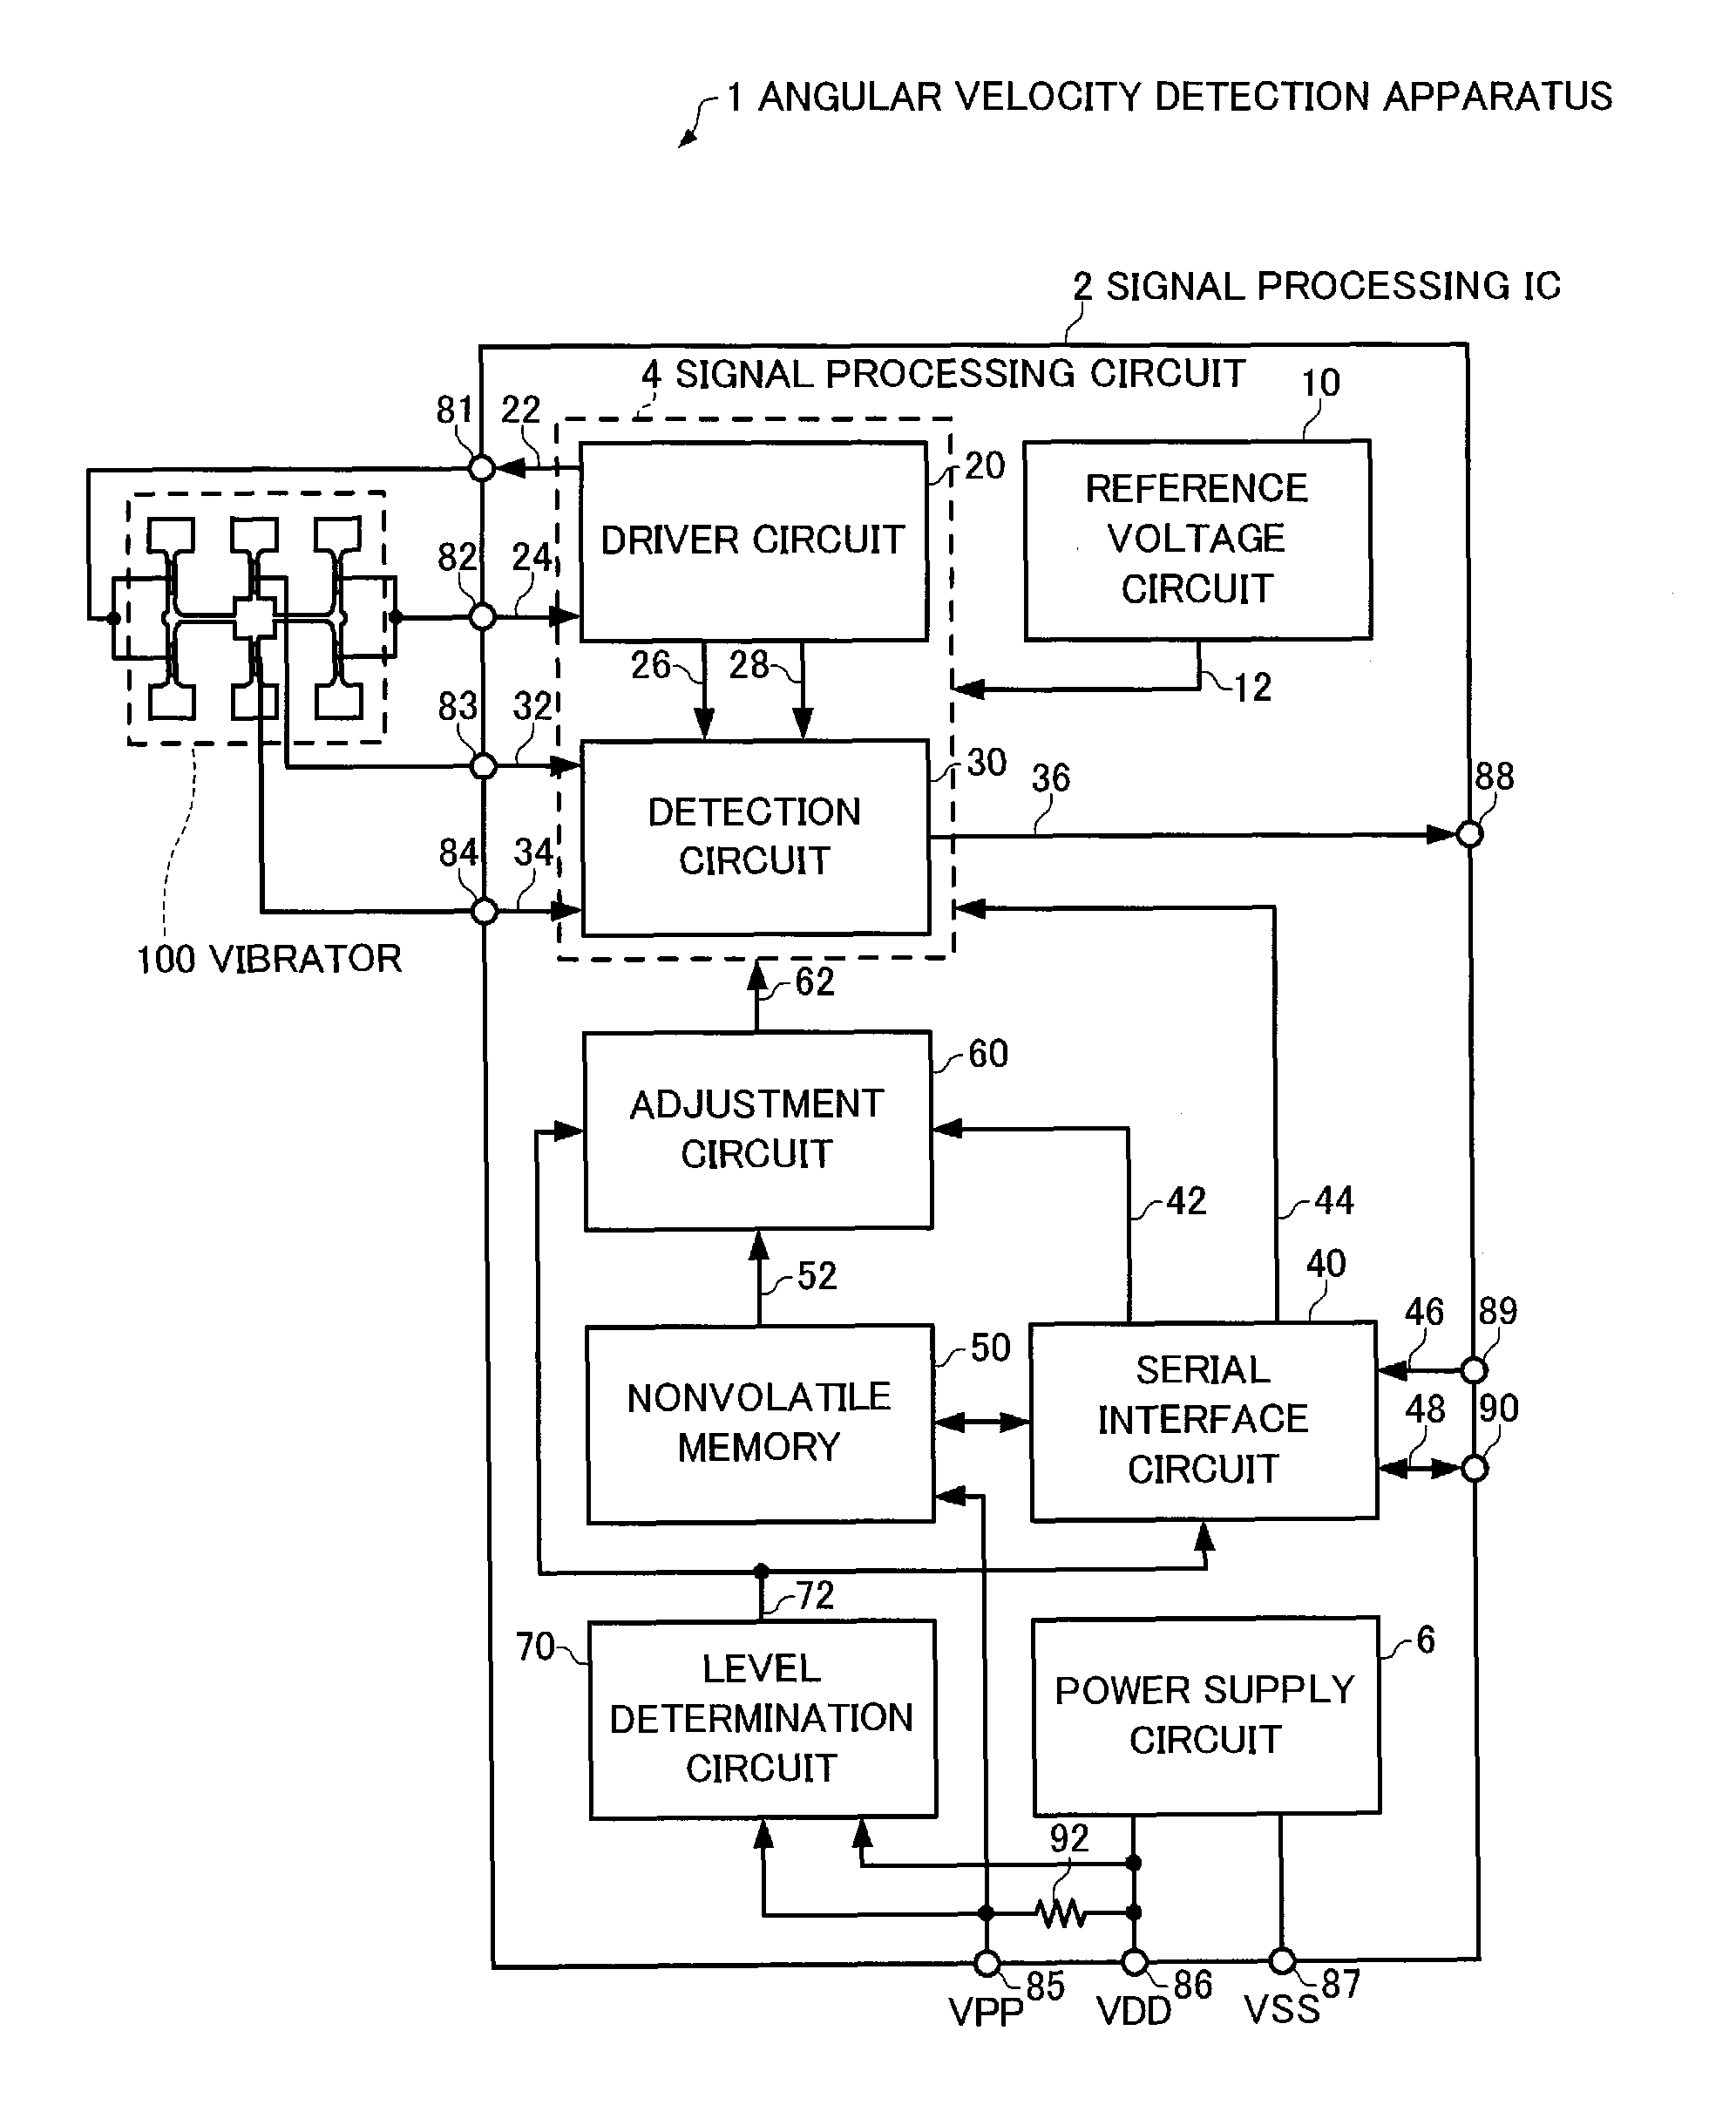 Signal processing circuit, physical quantity detection apparatus, angular velocity detection apparatus, integrated circuit device, and electronic instrument